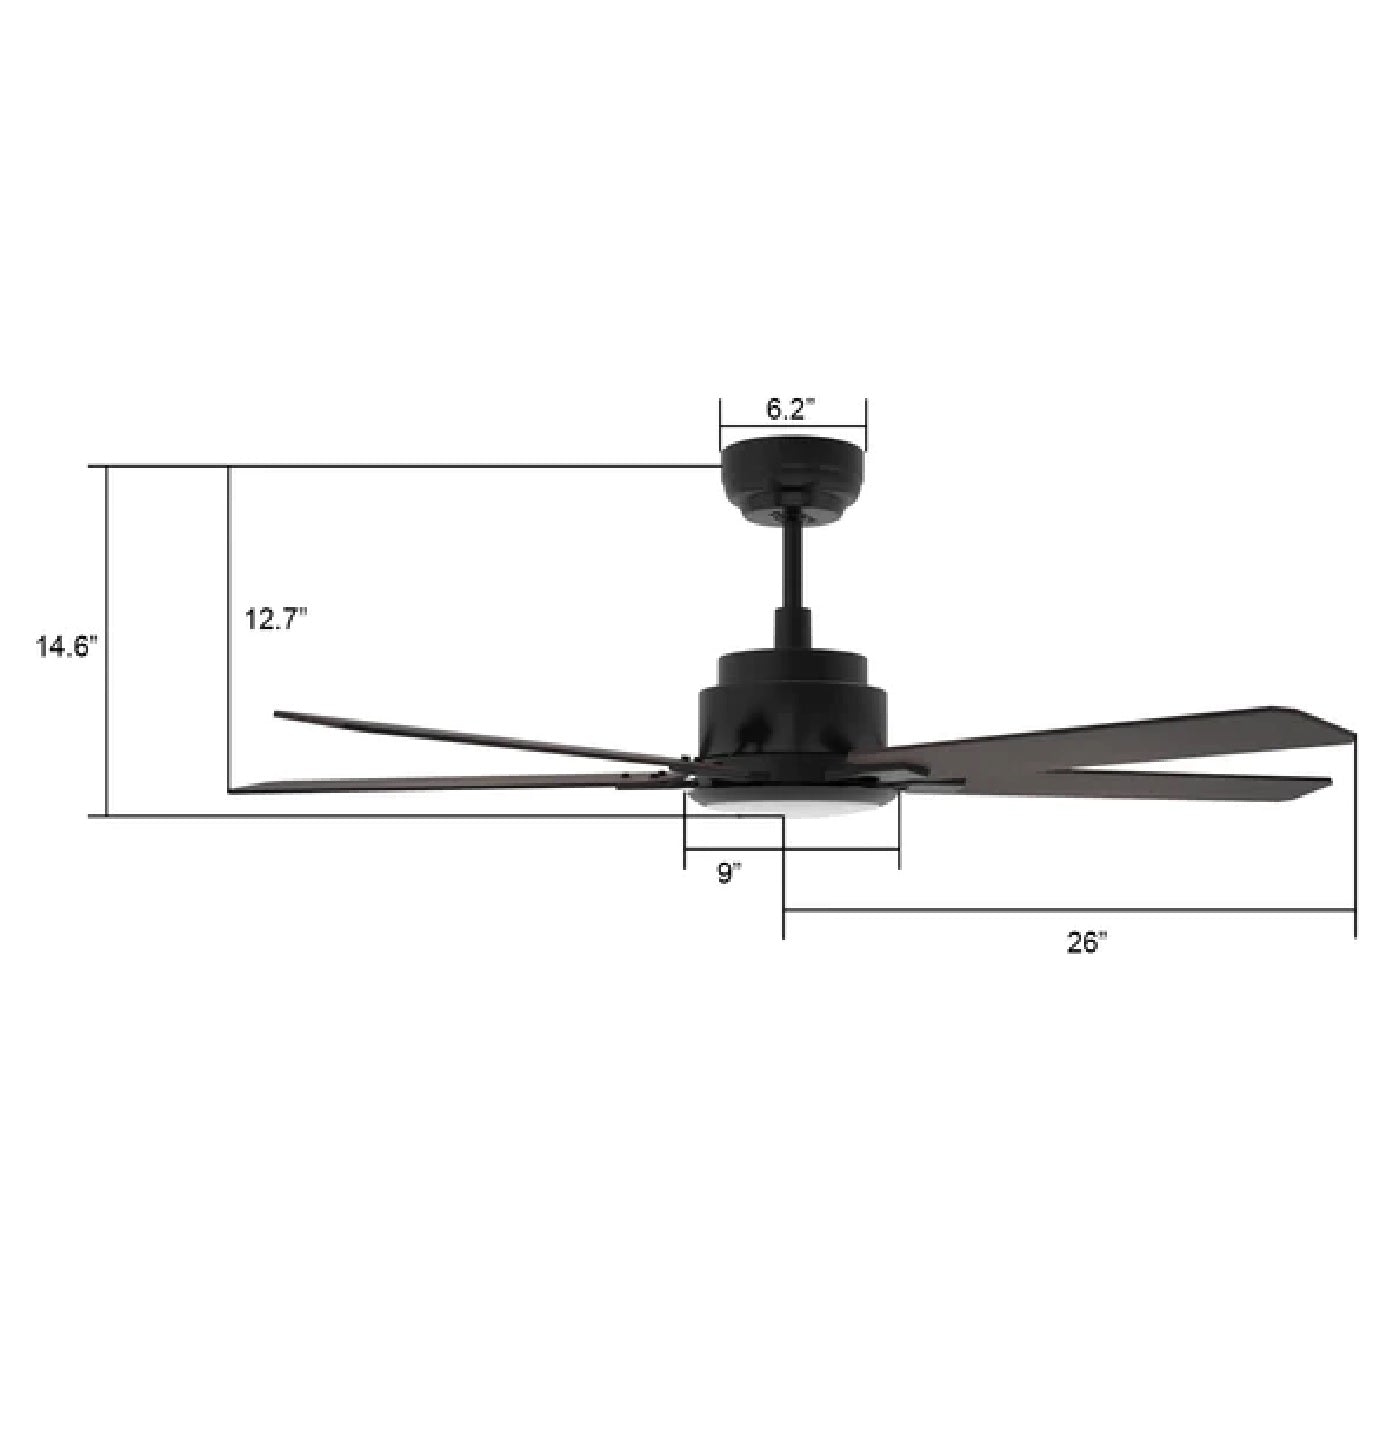 Carro - ESPEAR 52 inch 5-Blade Smart Ceiling Fan with LED Light Kit & Remote